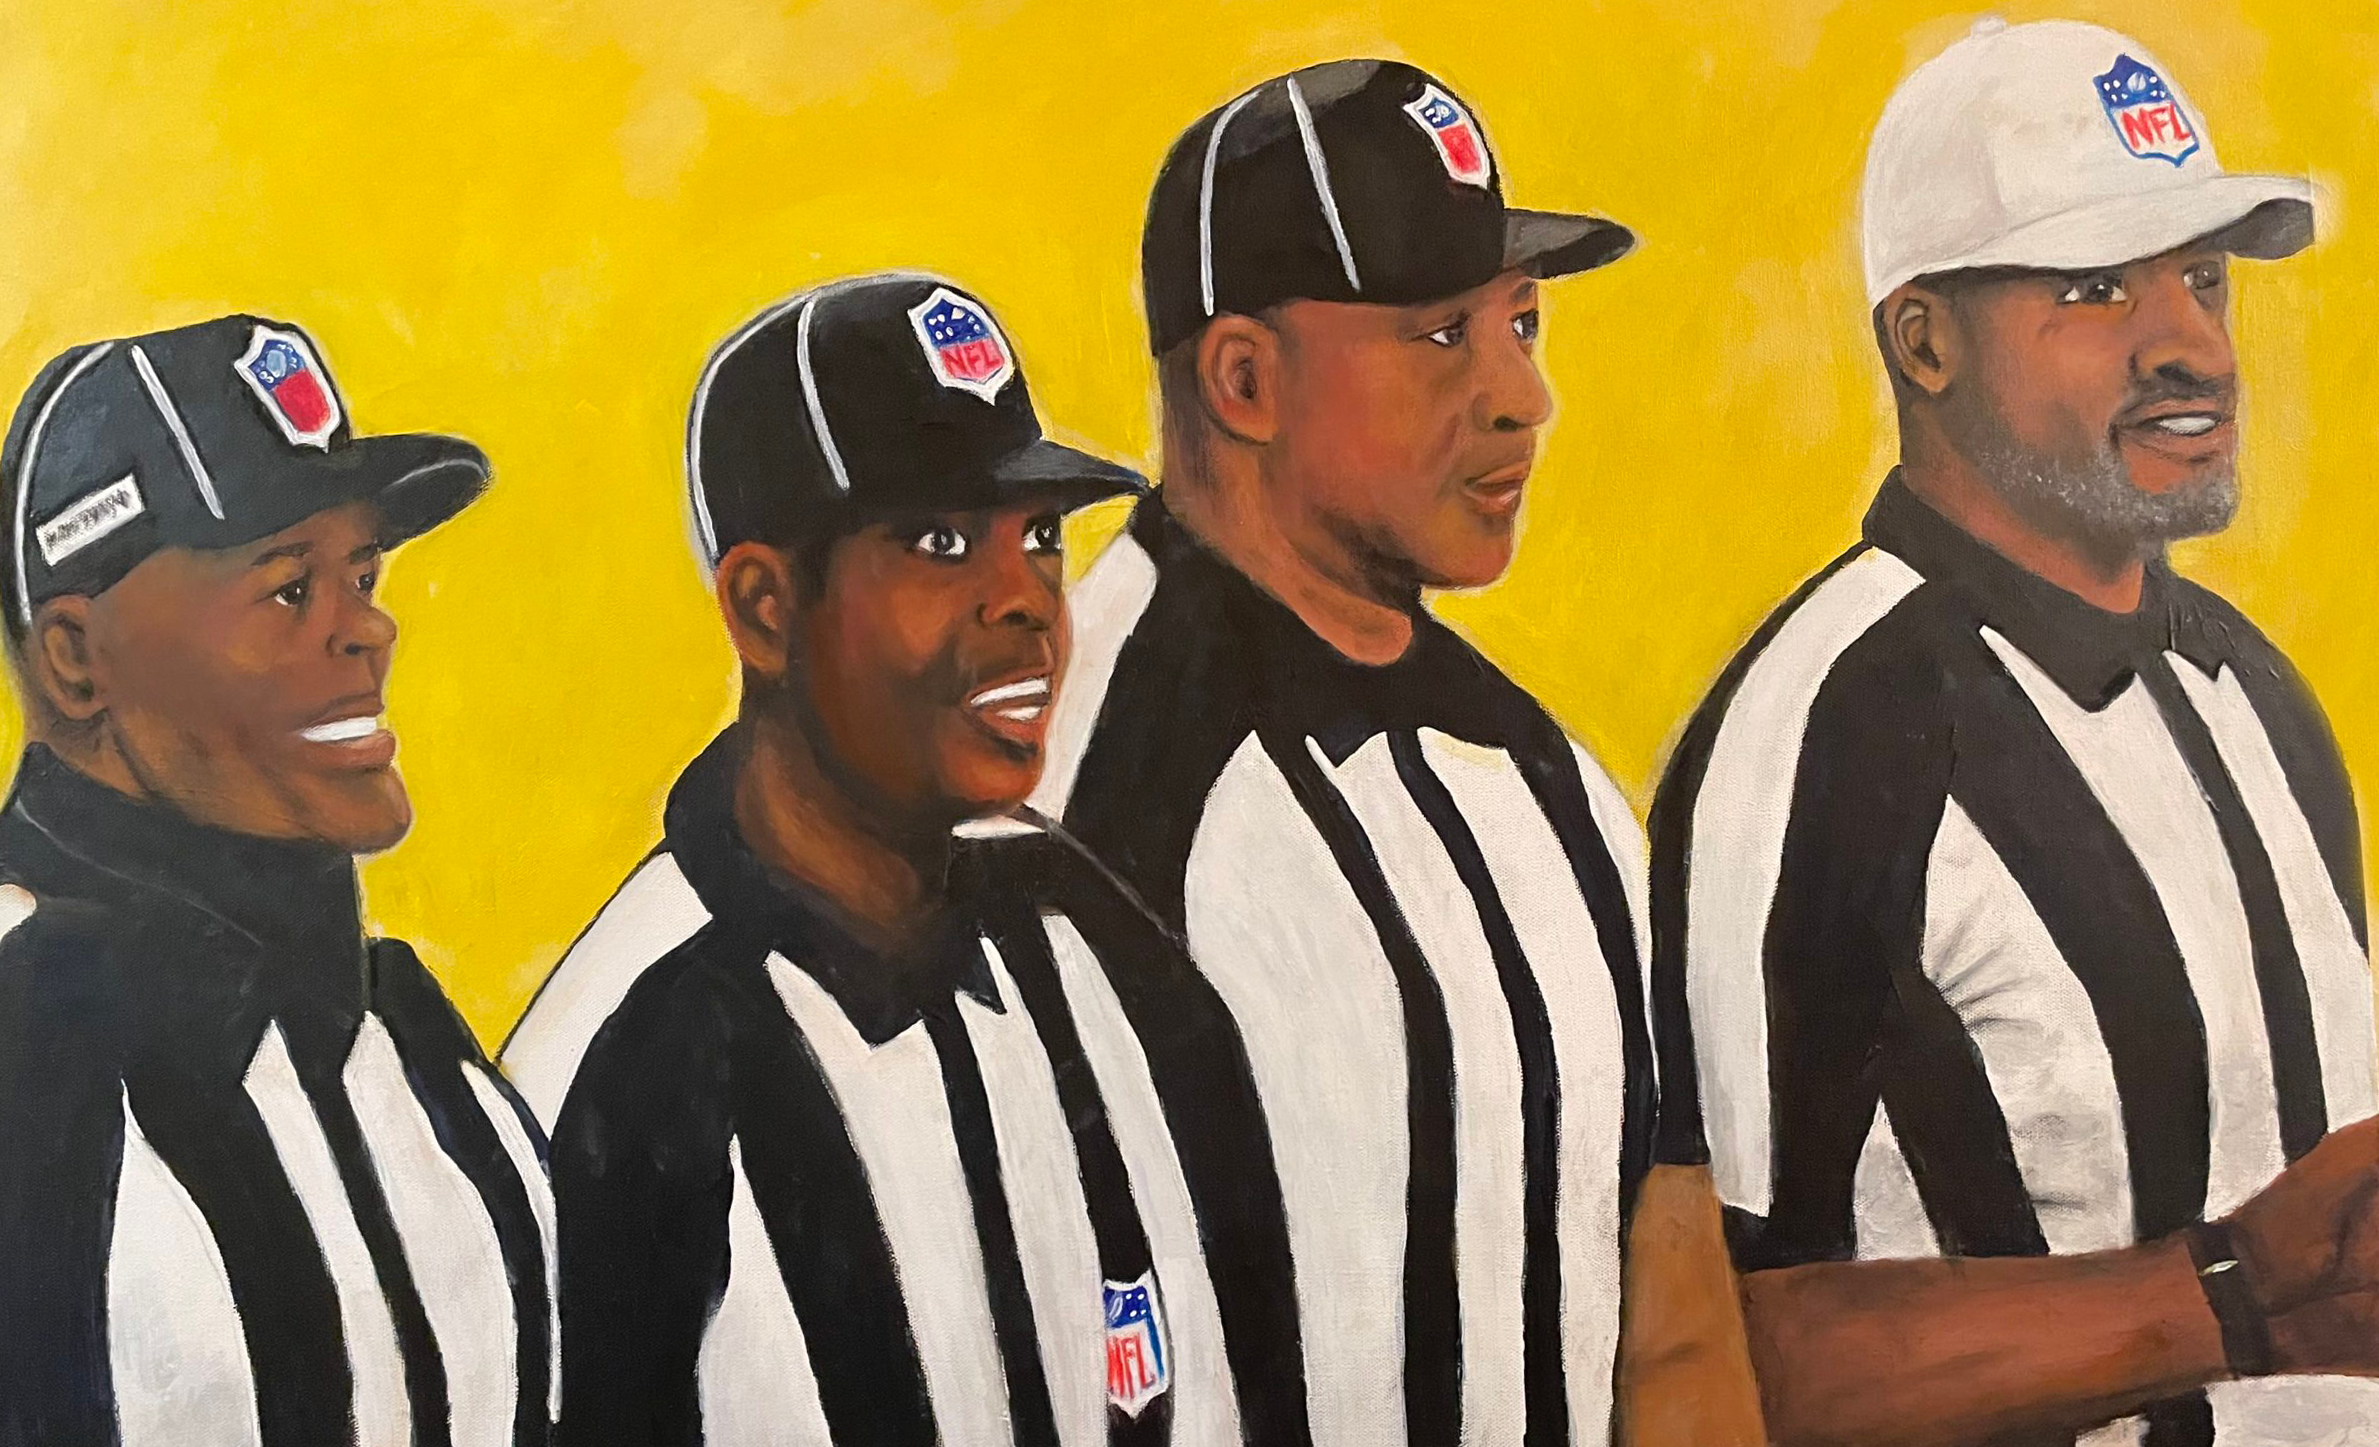 Four NFL Iconic Pioneers